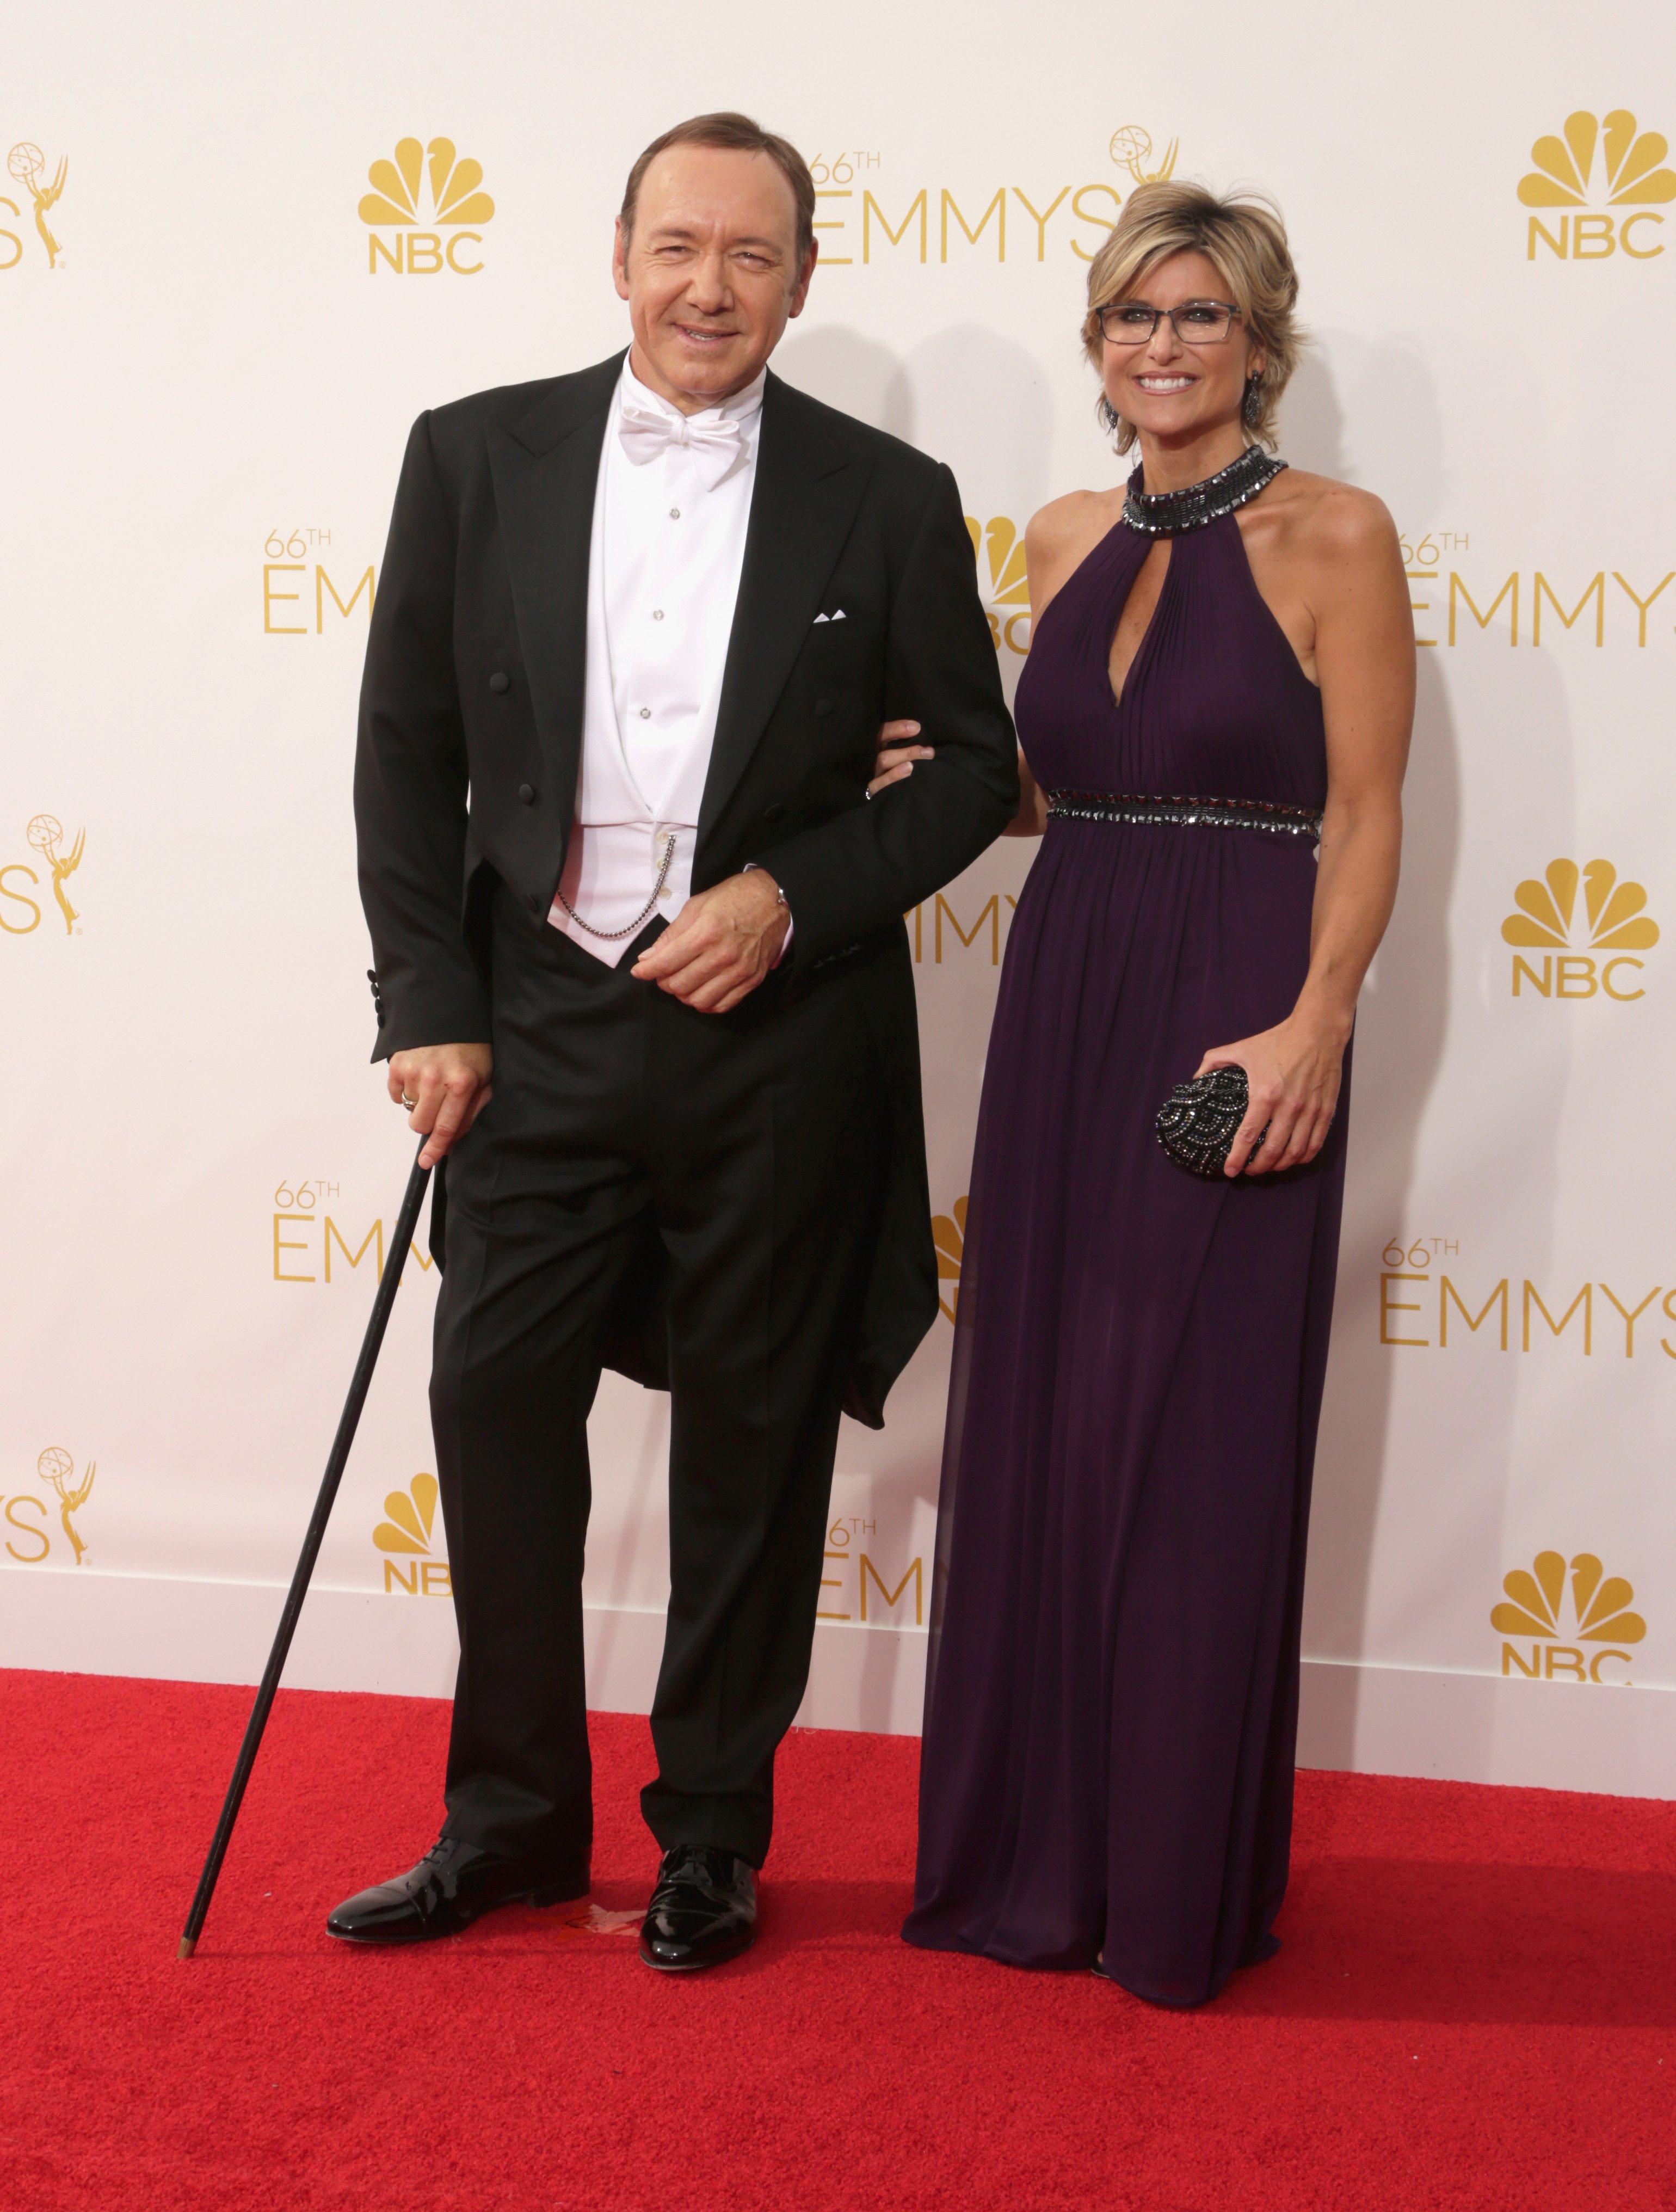 Kevin Spacey and Ashleigh Banfield at the 66th Annual Primetime Emmy Awards on August 25, 2014, in Los Angeles | Source: Getty Images